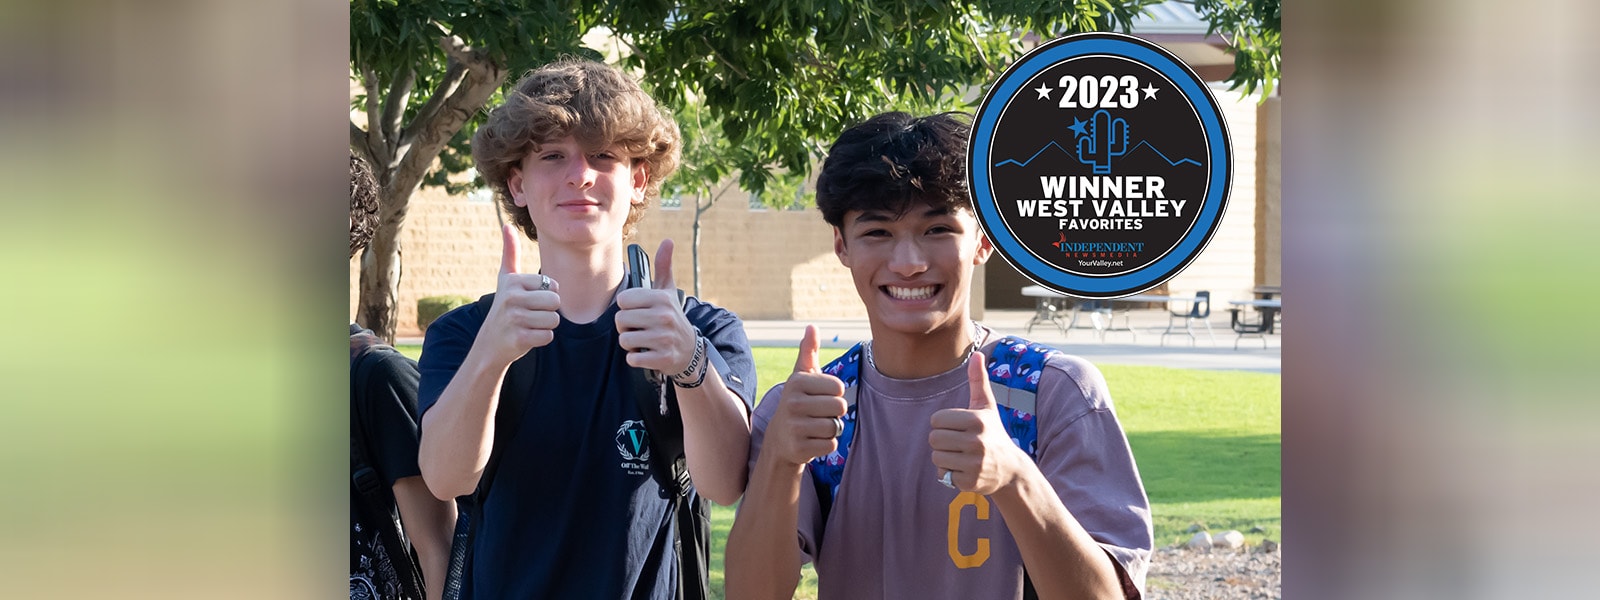 Students giving a thumbs up with West Valley Favorites logo.